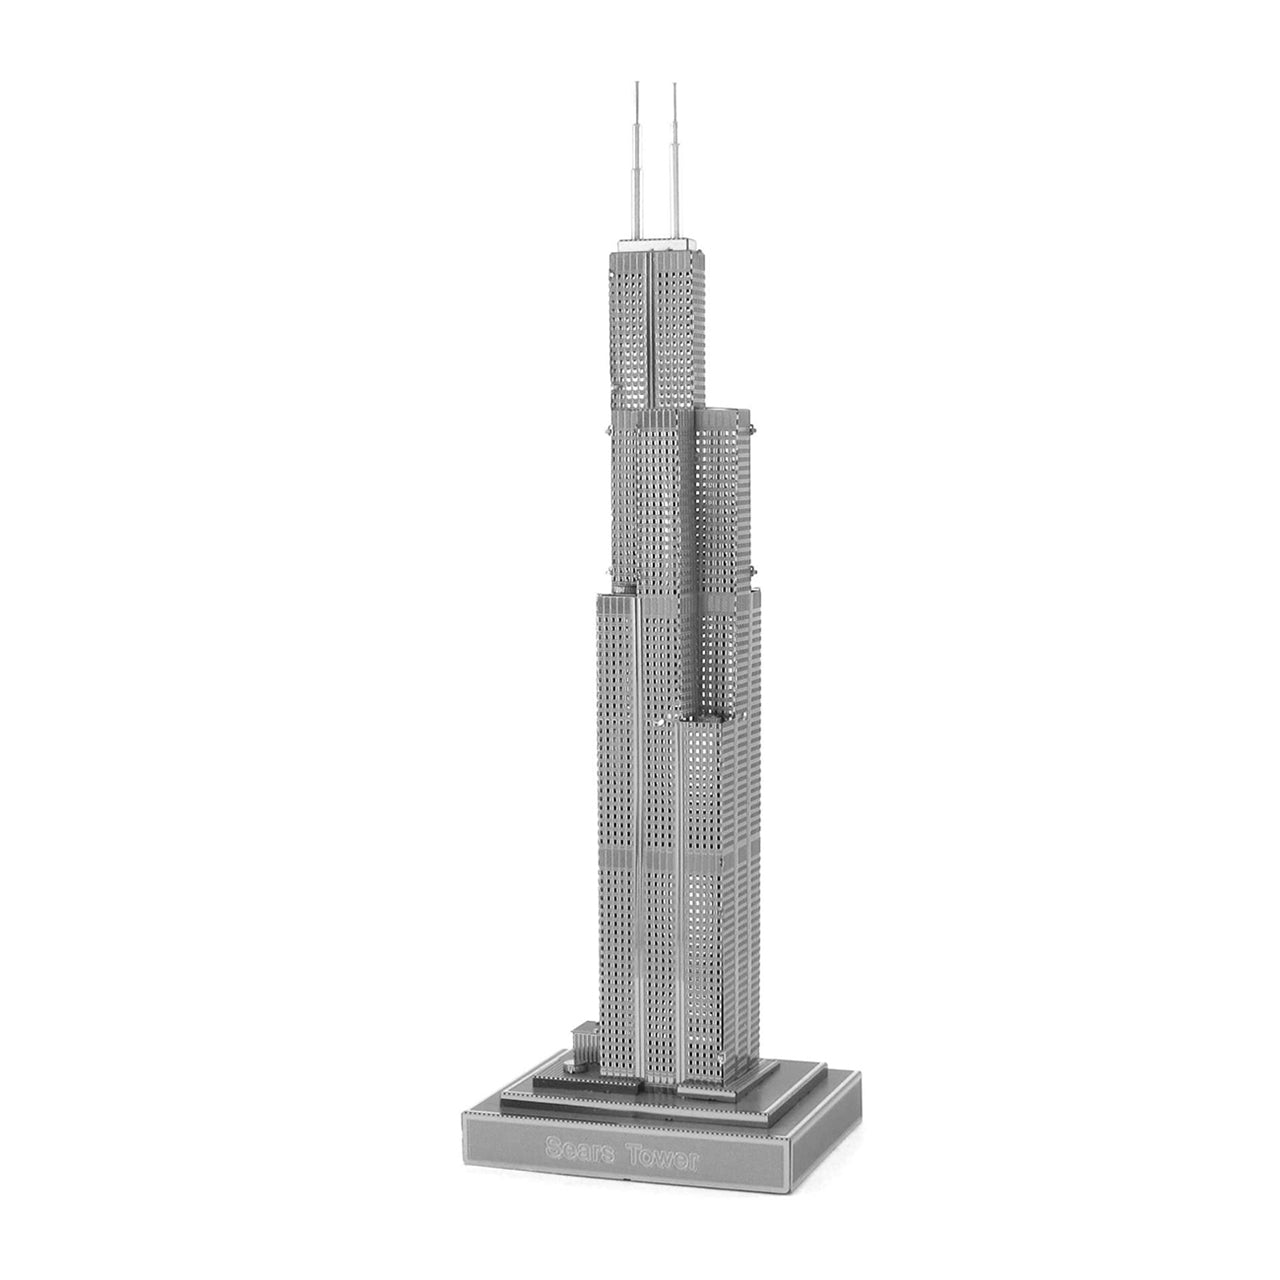 SEARS TOWER 5194-ZD32